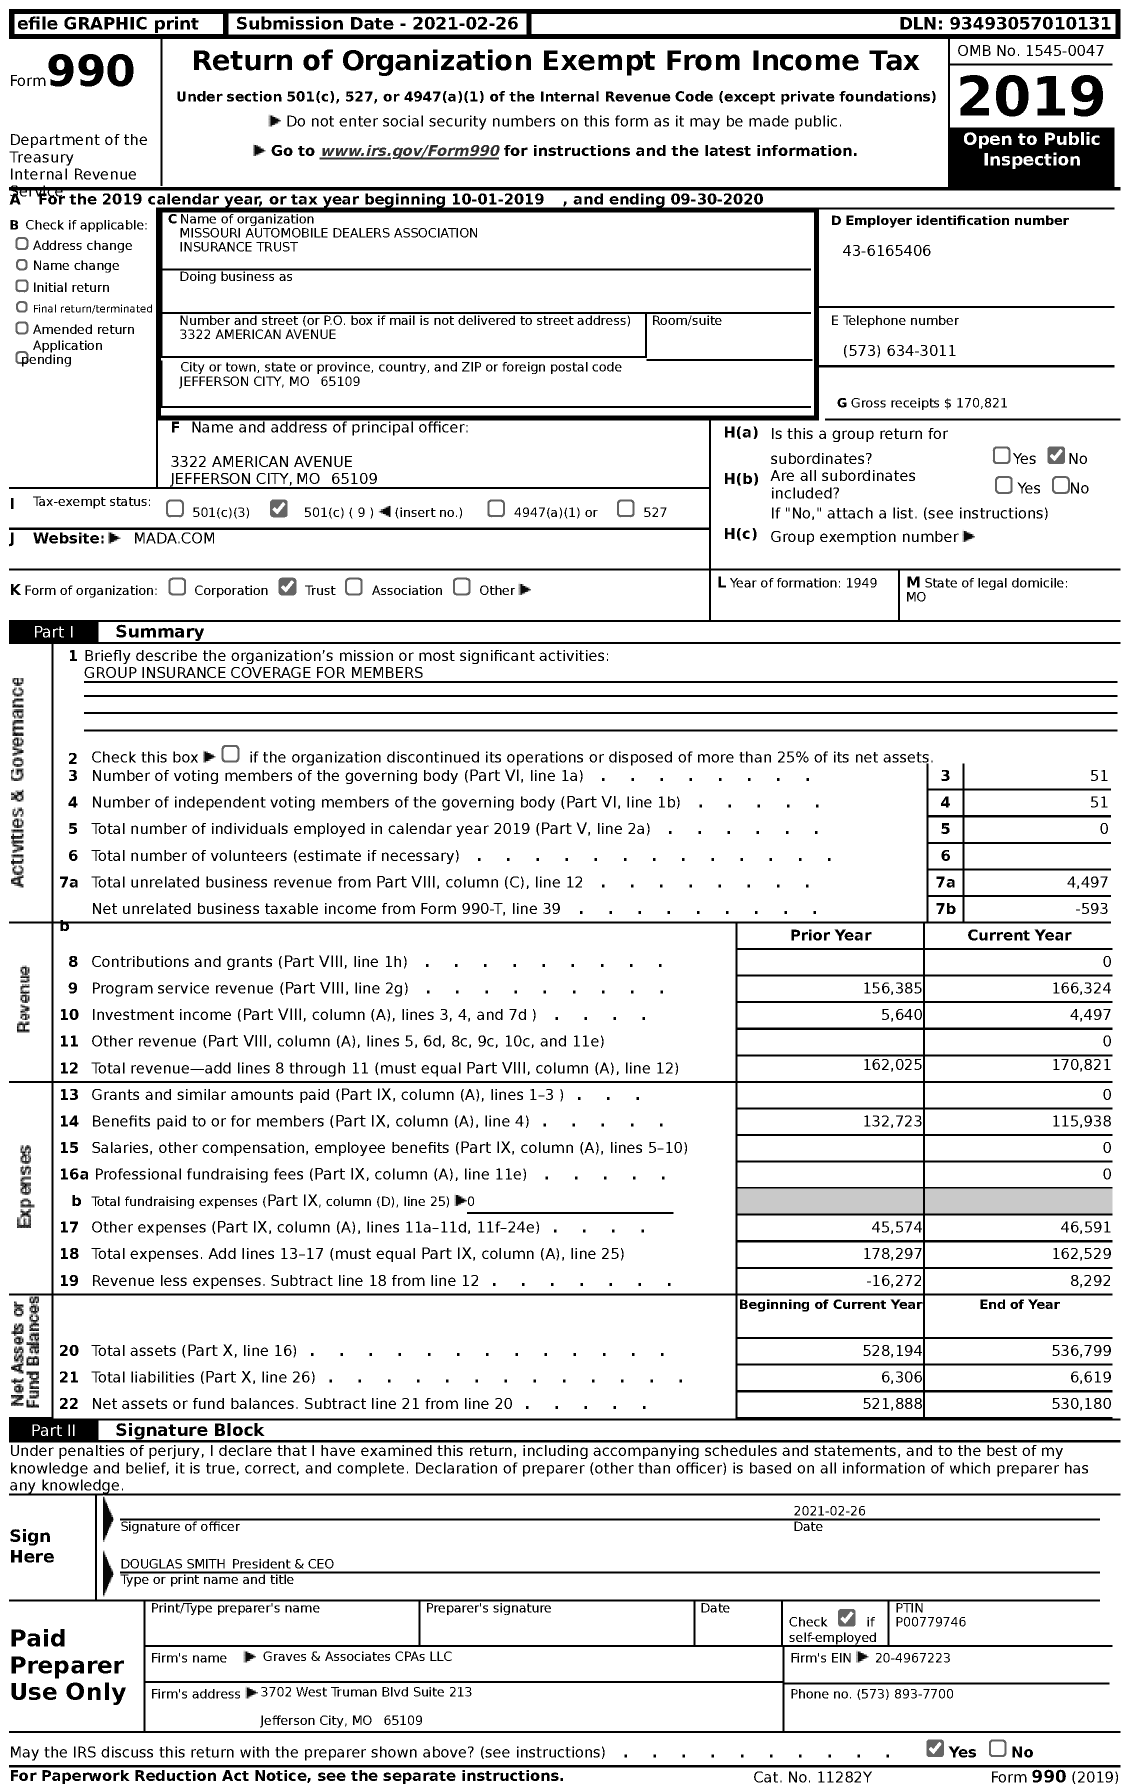 Image of first page of 2019 Form 990 for Missouri Automobile Dealers Association Insurance Trust